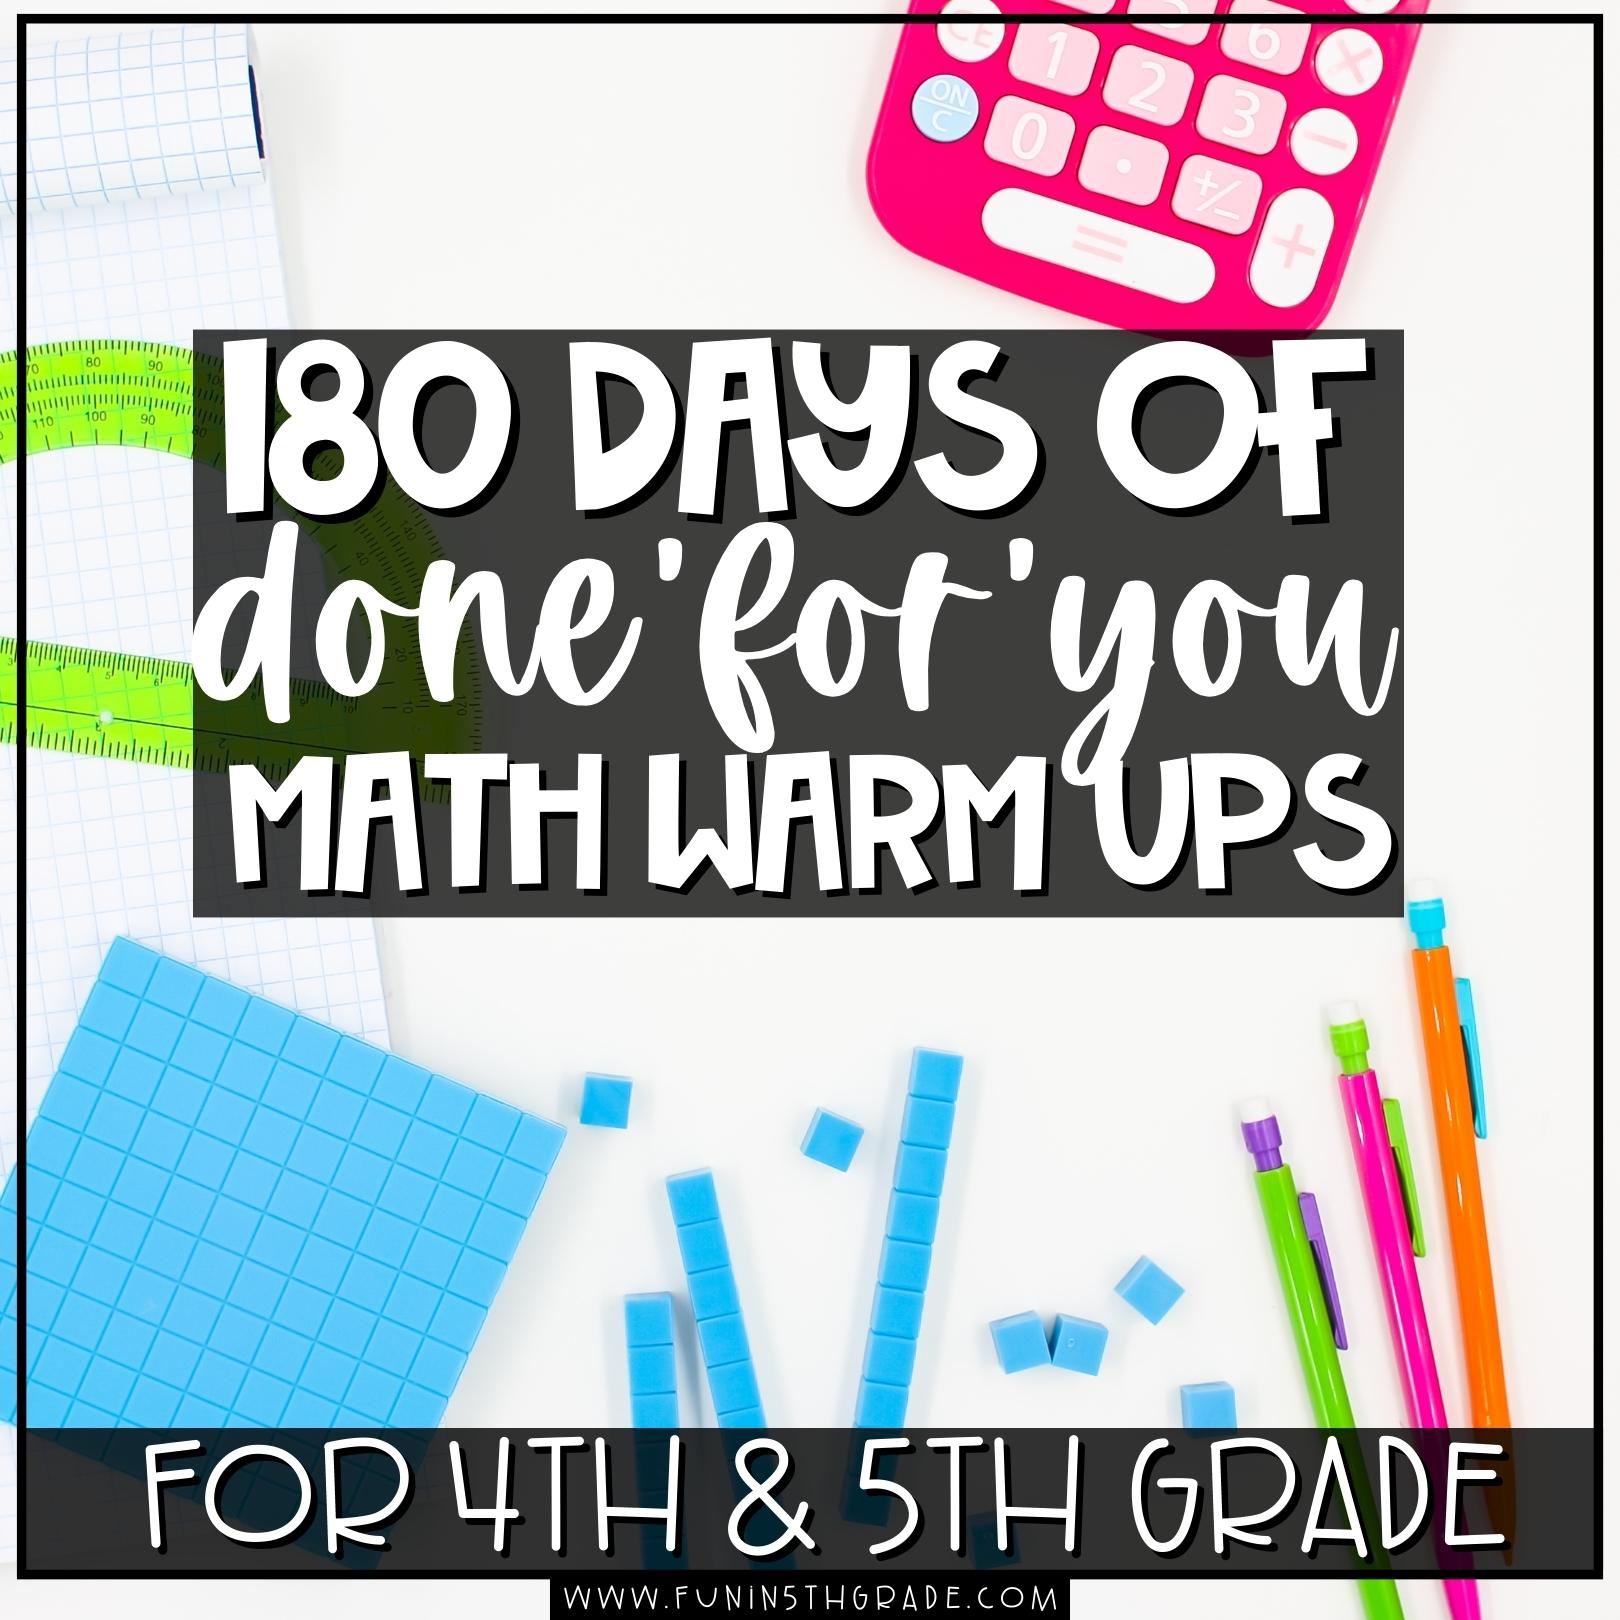 180 Days of Math Warm Ups for 4th and 5th Grade